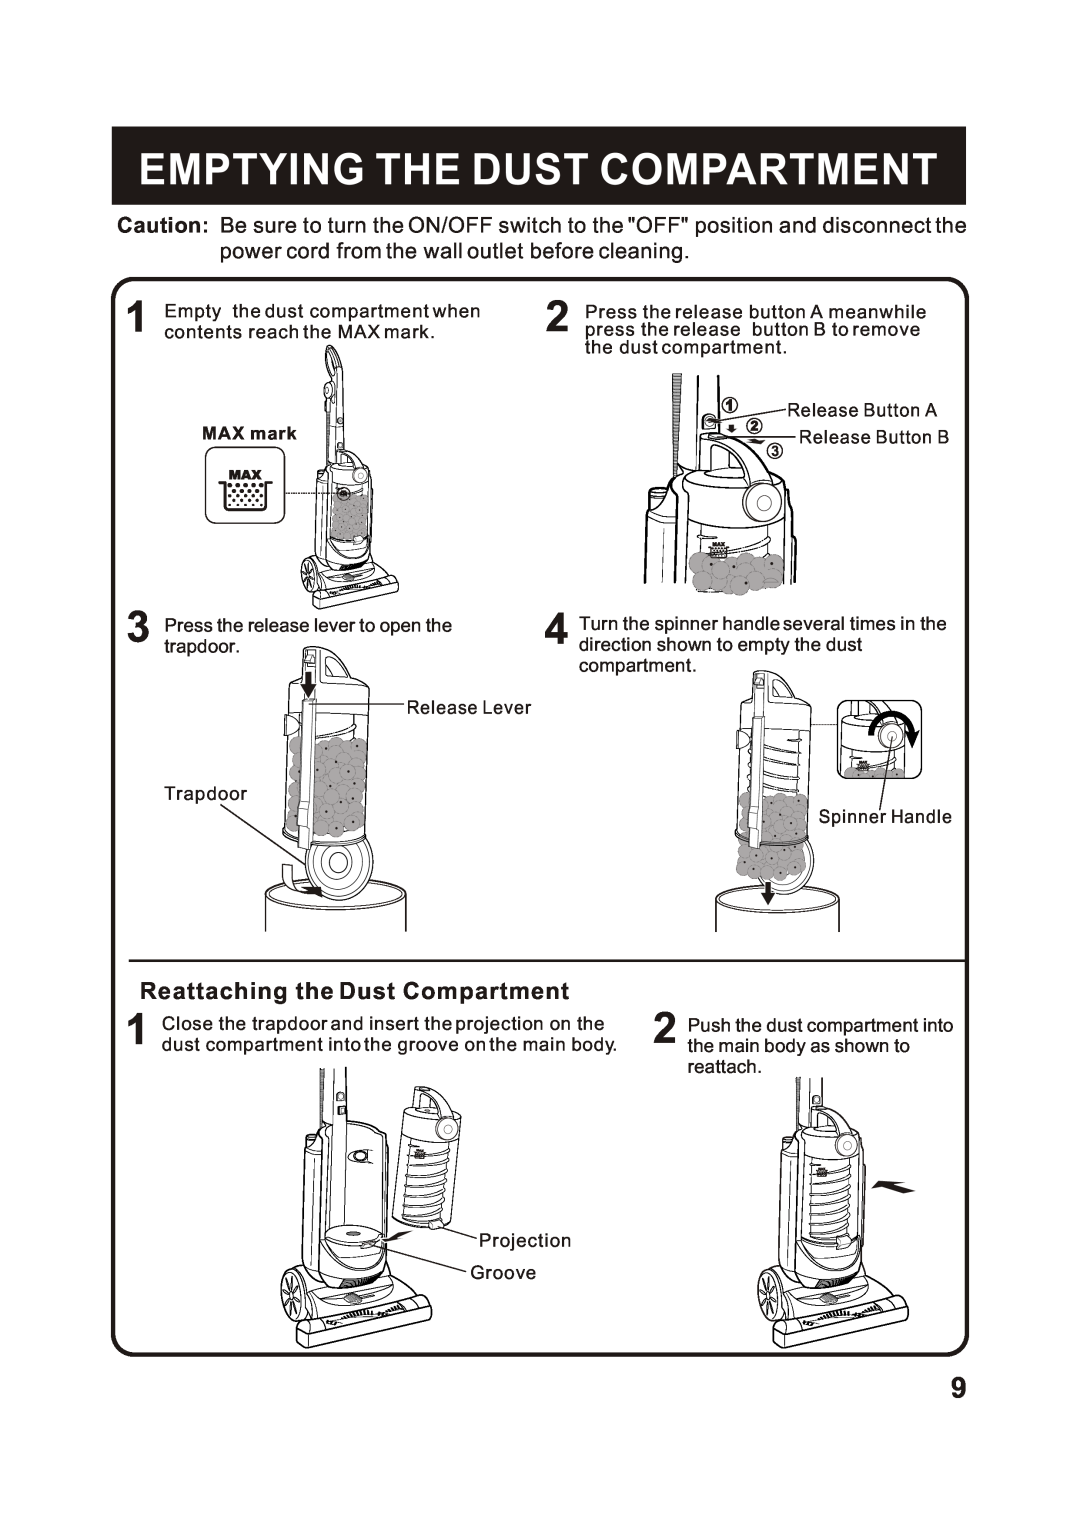 Fantom Vacuum FM780 instruction manual Emptying The Dust Compartment, power cord from the wall outlet before cleaning 